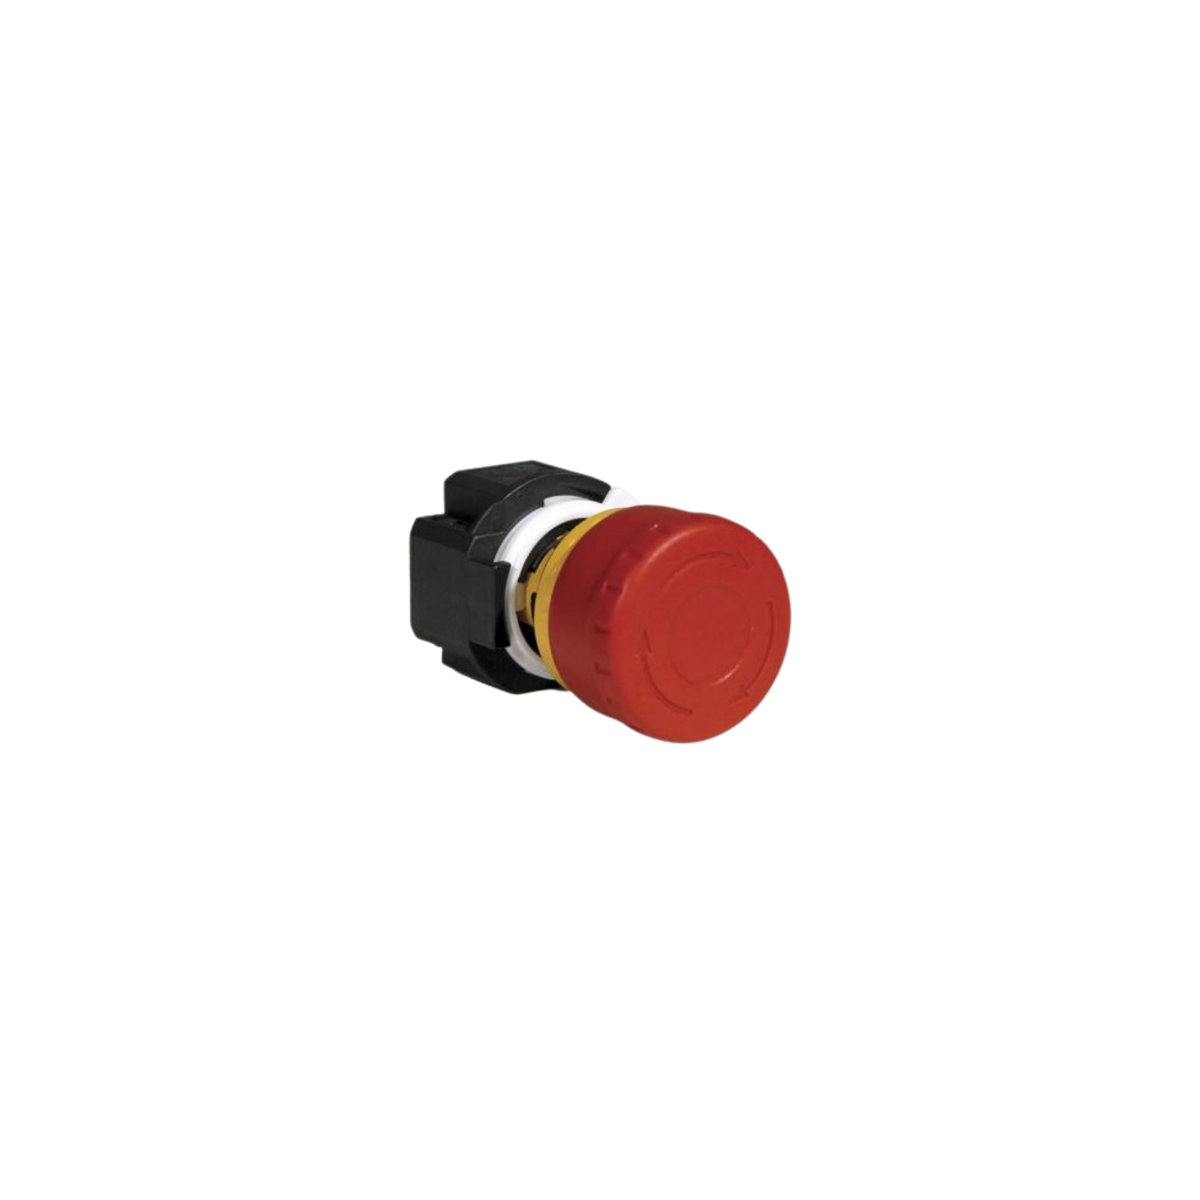 front side view of a stop button with black housing and a red button in the front